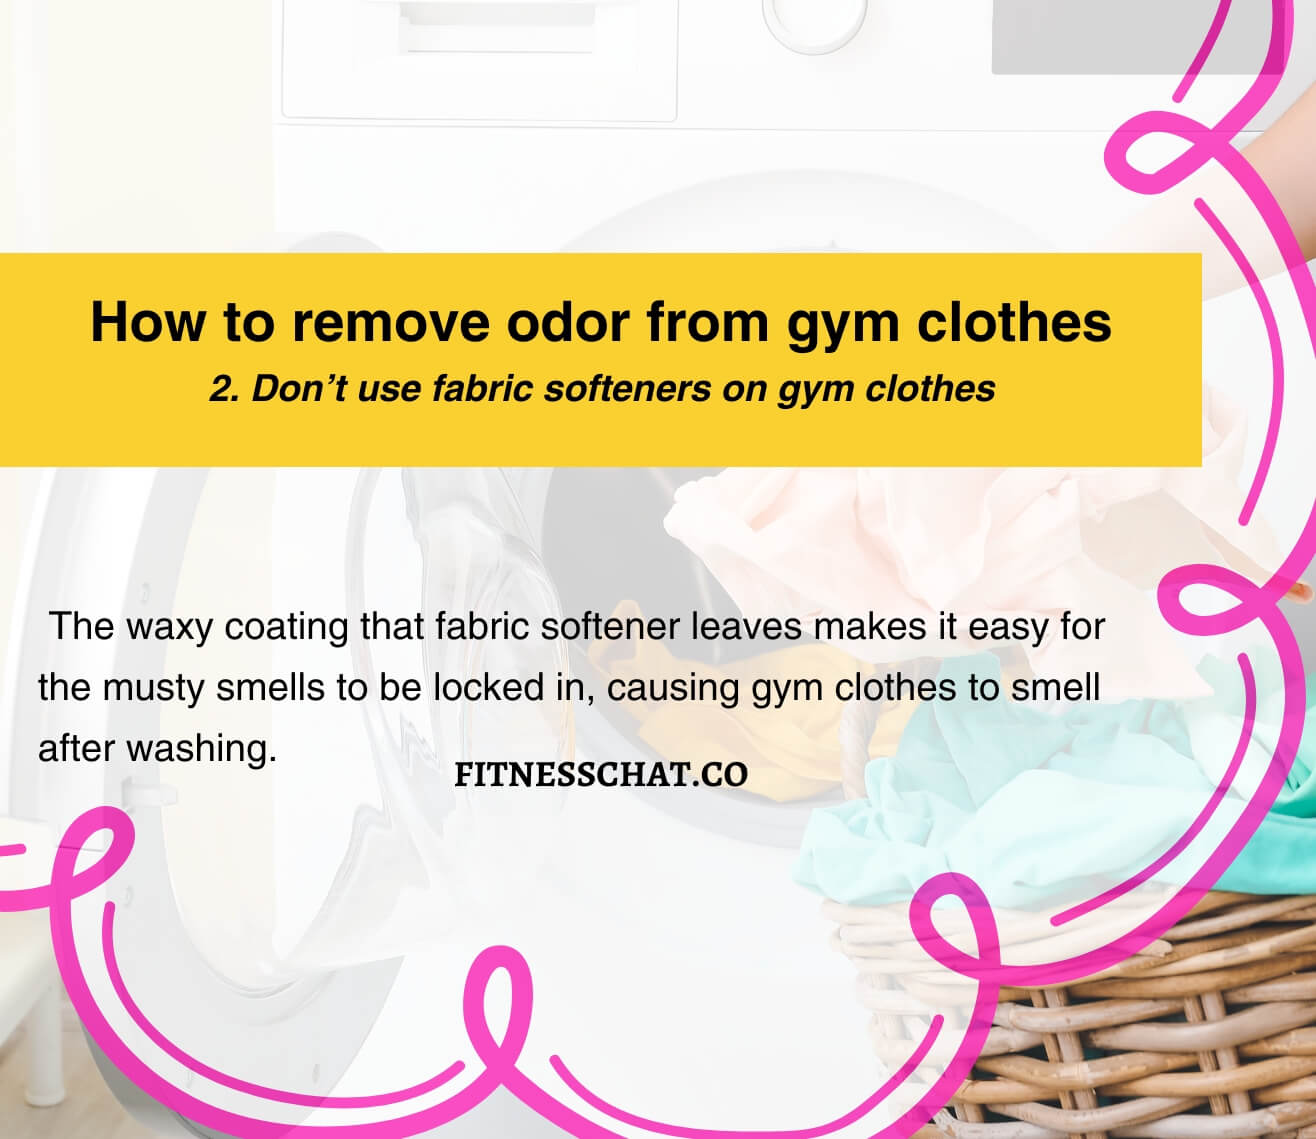 How to remove odor from gym clothes -Don’t use fabric softeners on gym clothes